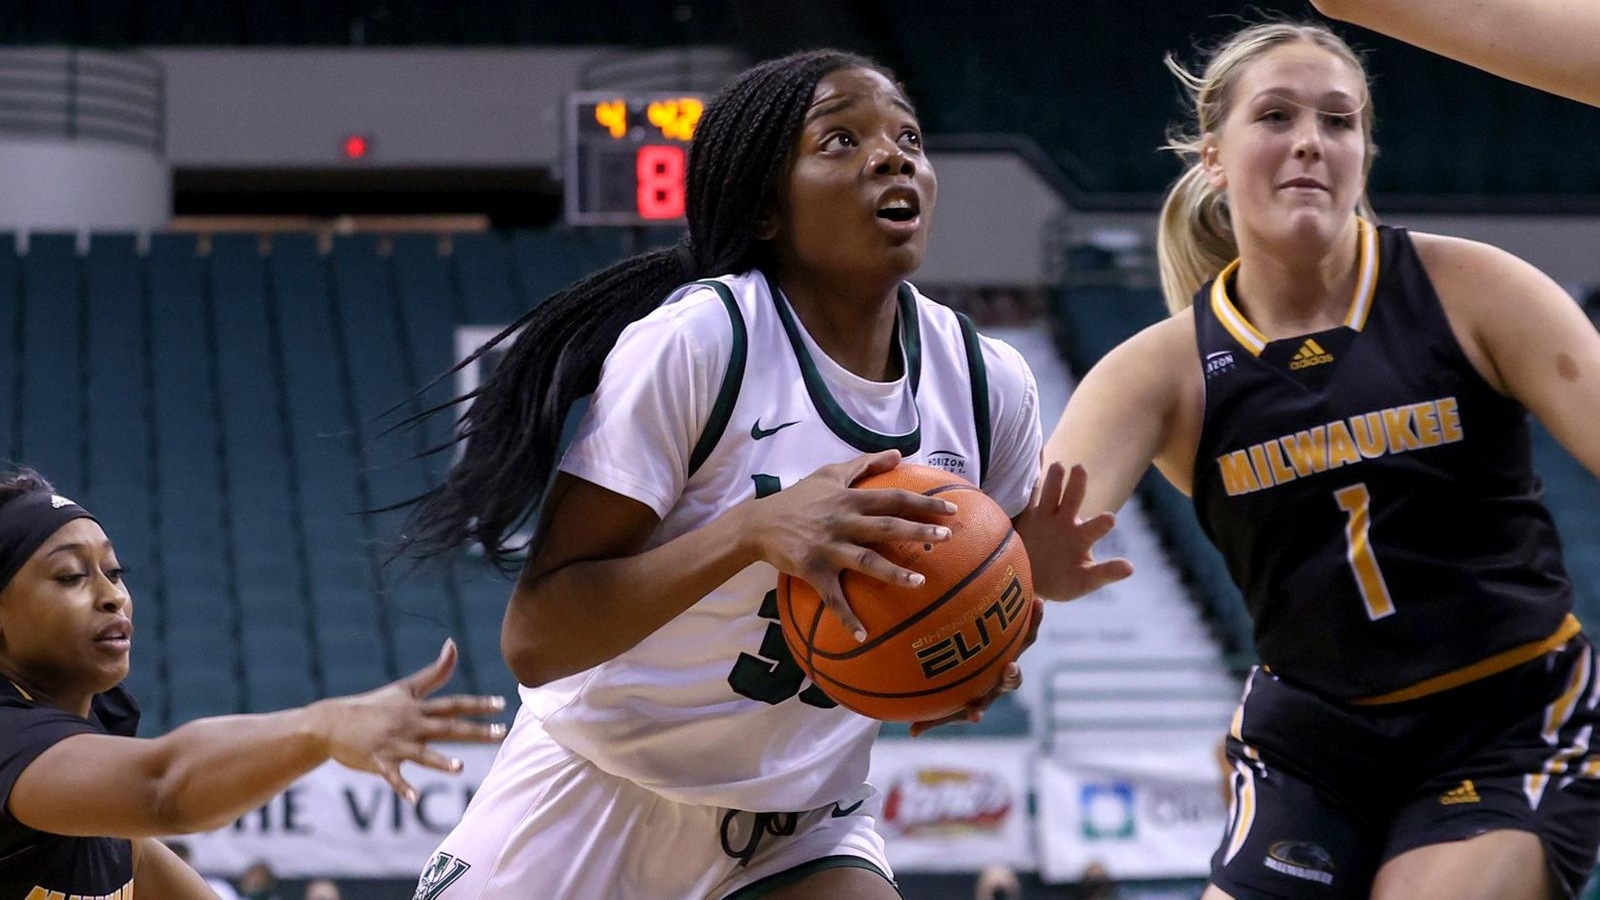 Cleveland State Women’s Basketball Clinches #HLWBB Quarterfinal Home Game With 67-55 Victory Over Milwaukee